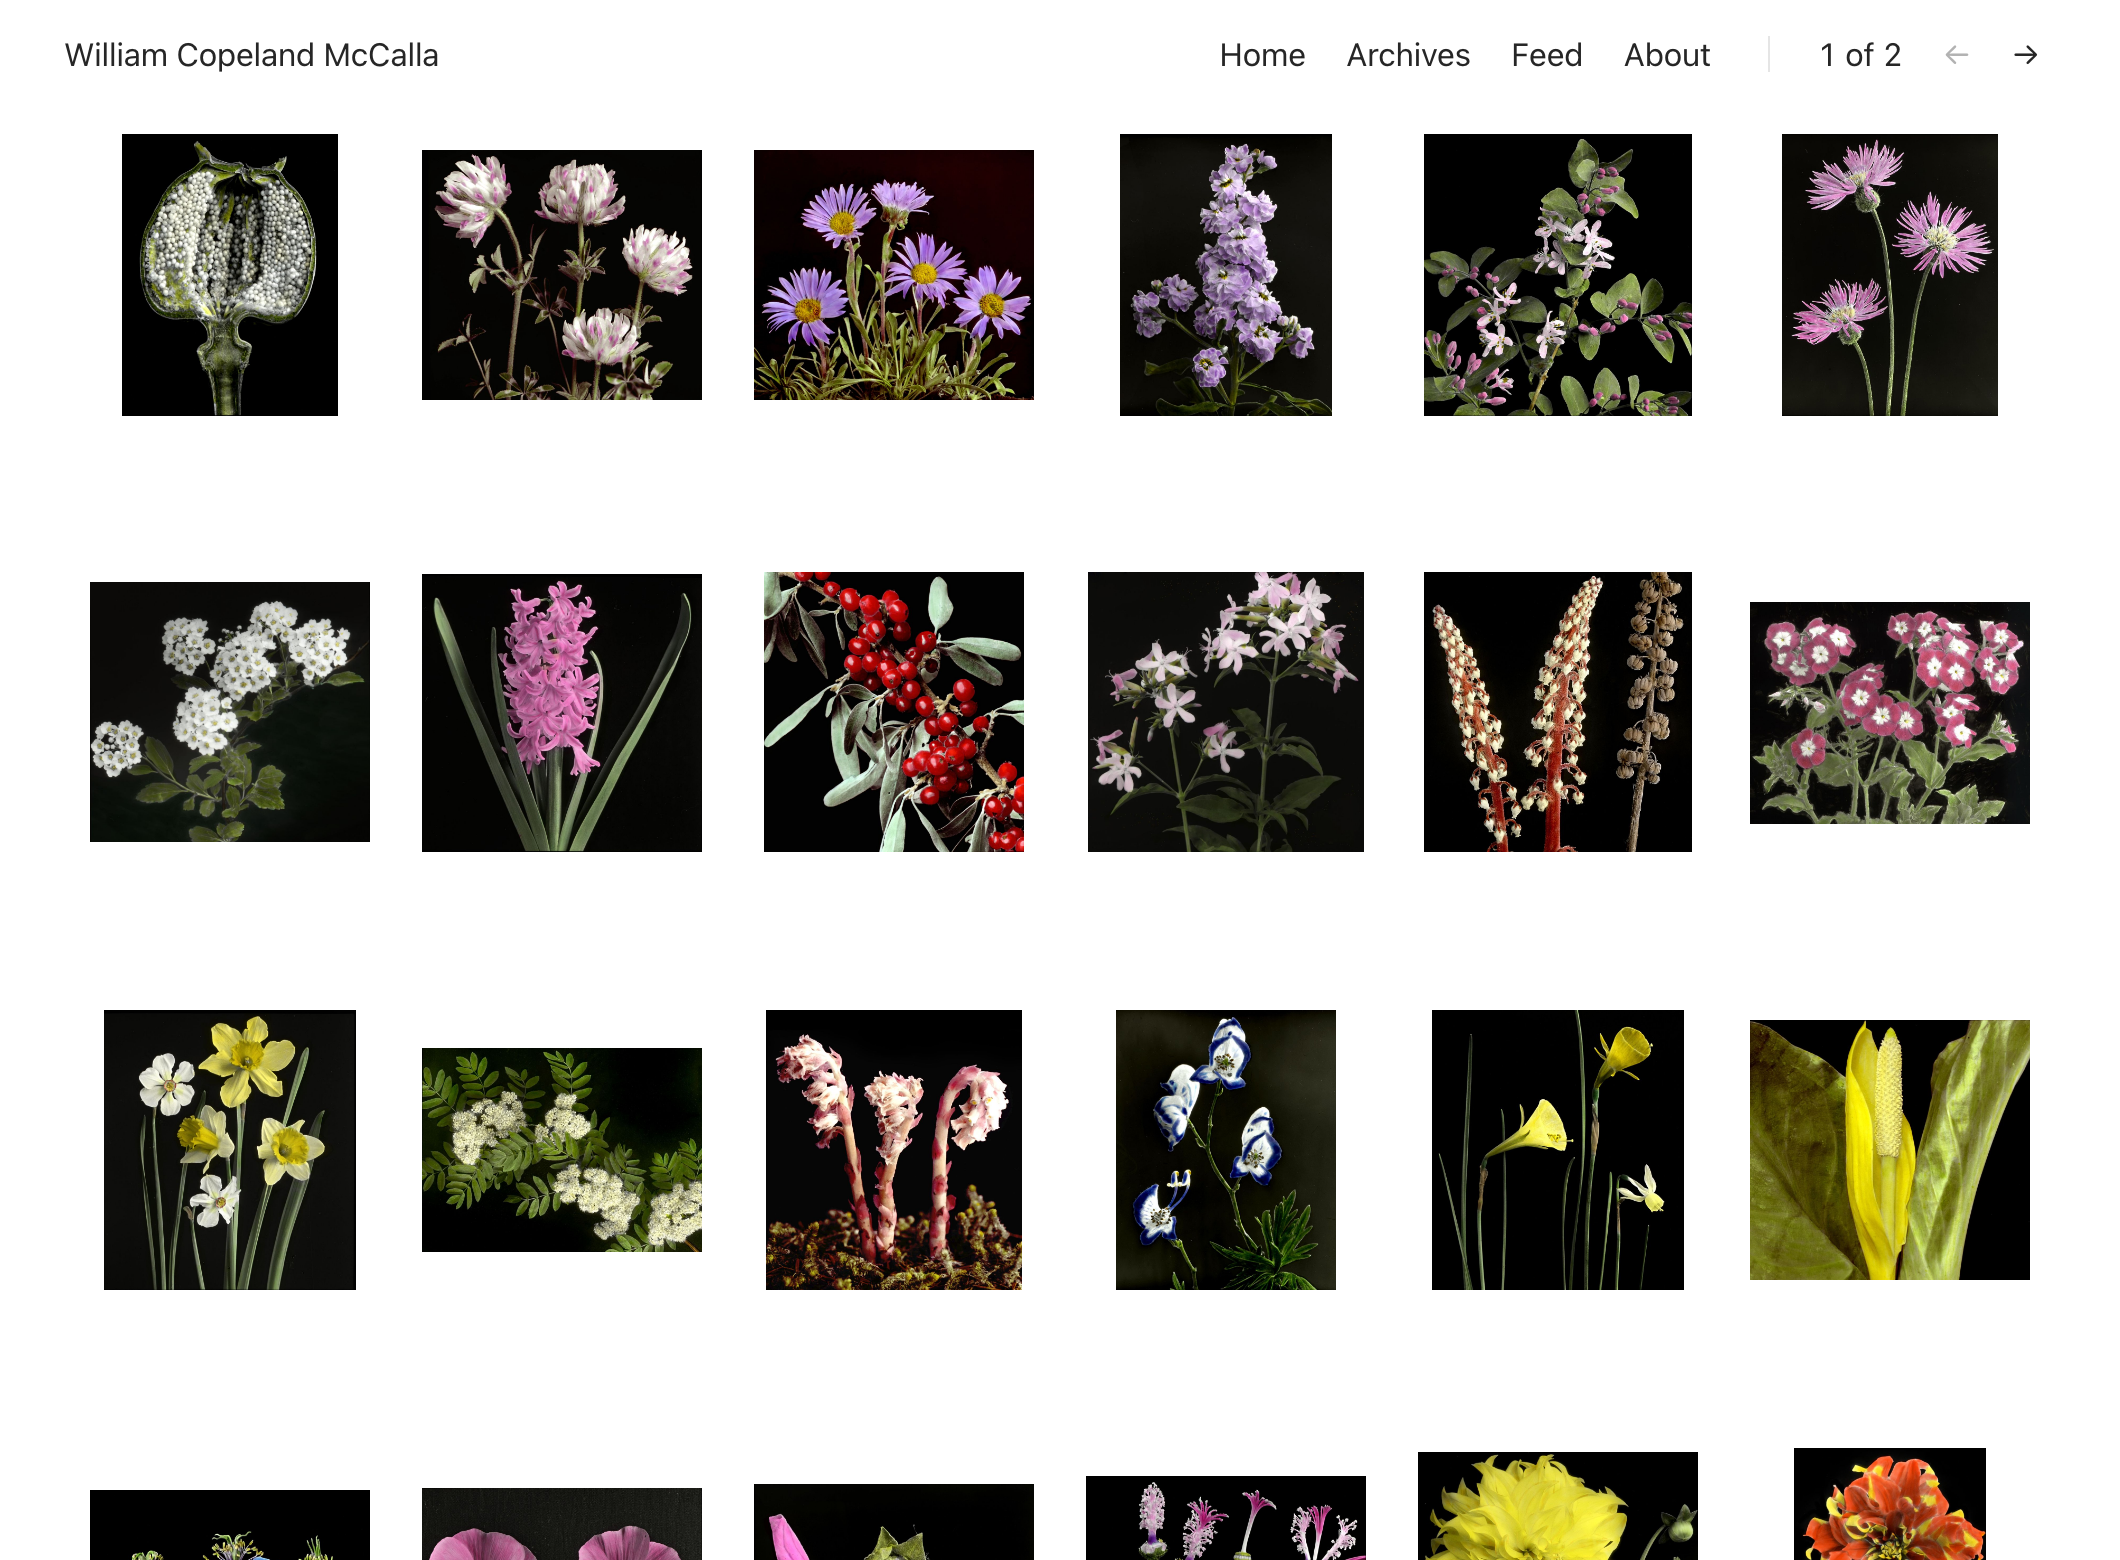 Website screenshot with a grid of photos of plants. The website design is minimal with only some navigation elements to change pagination.